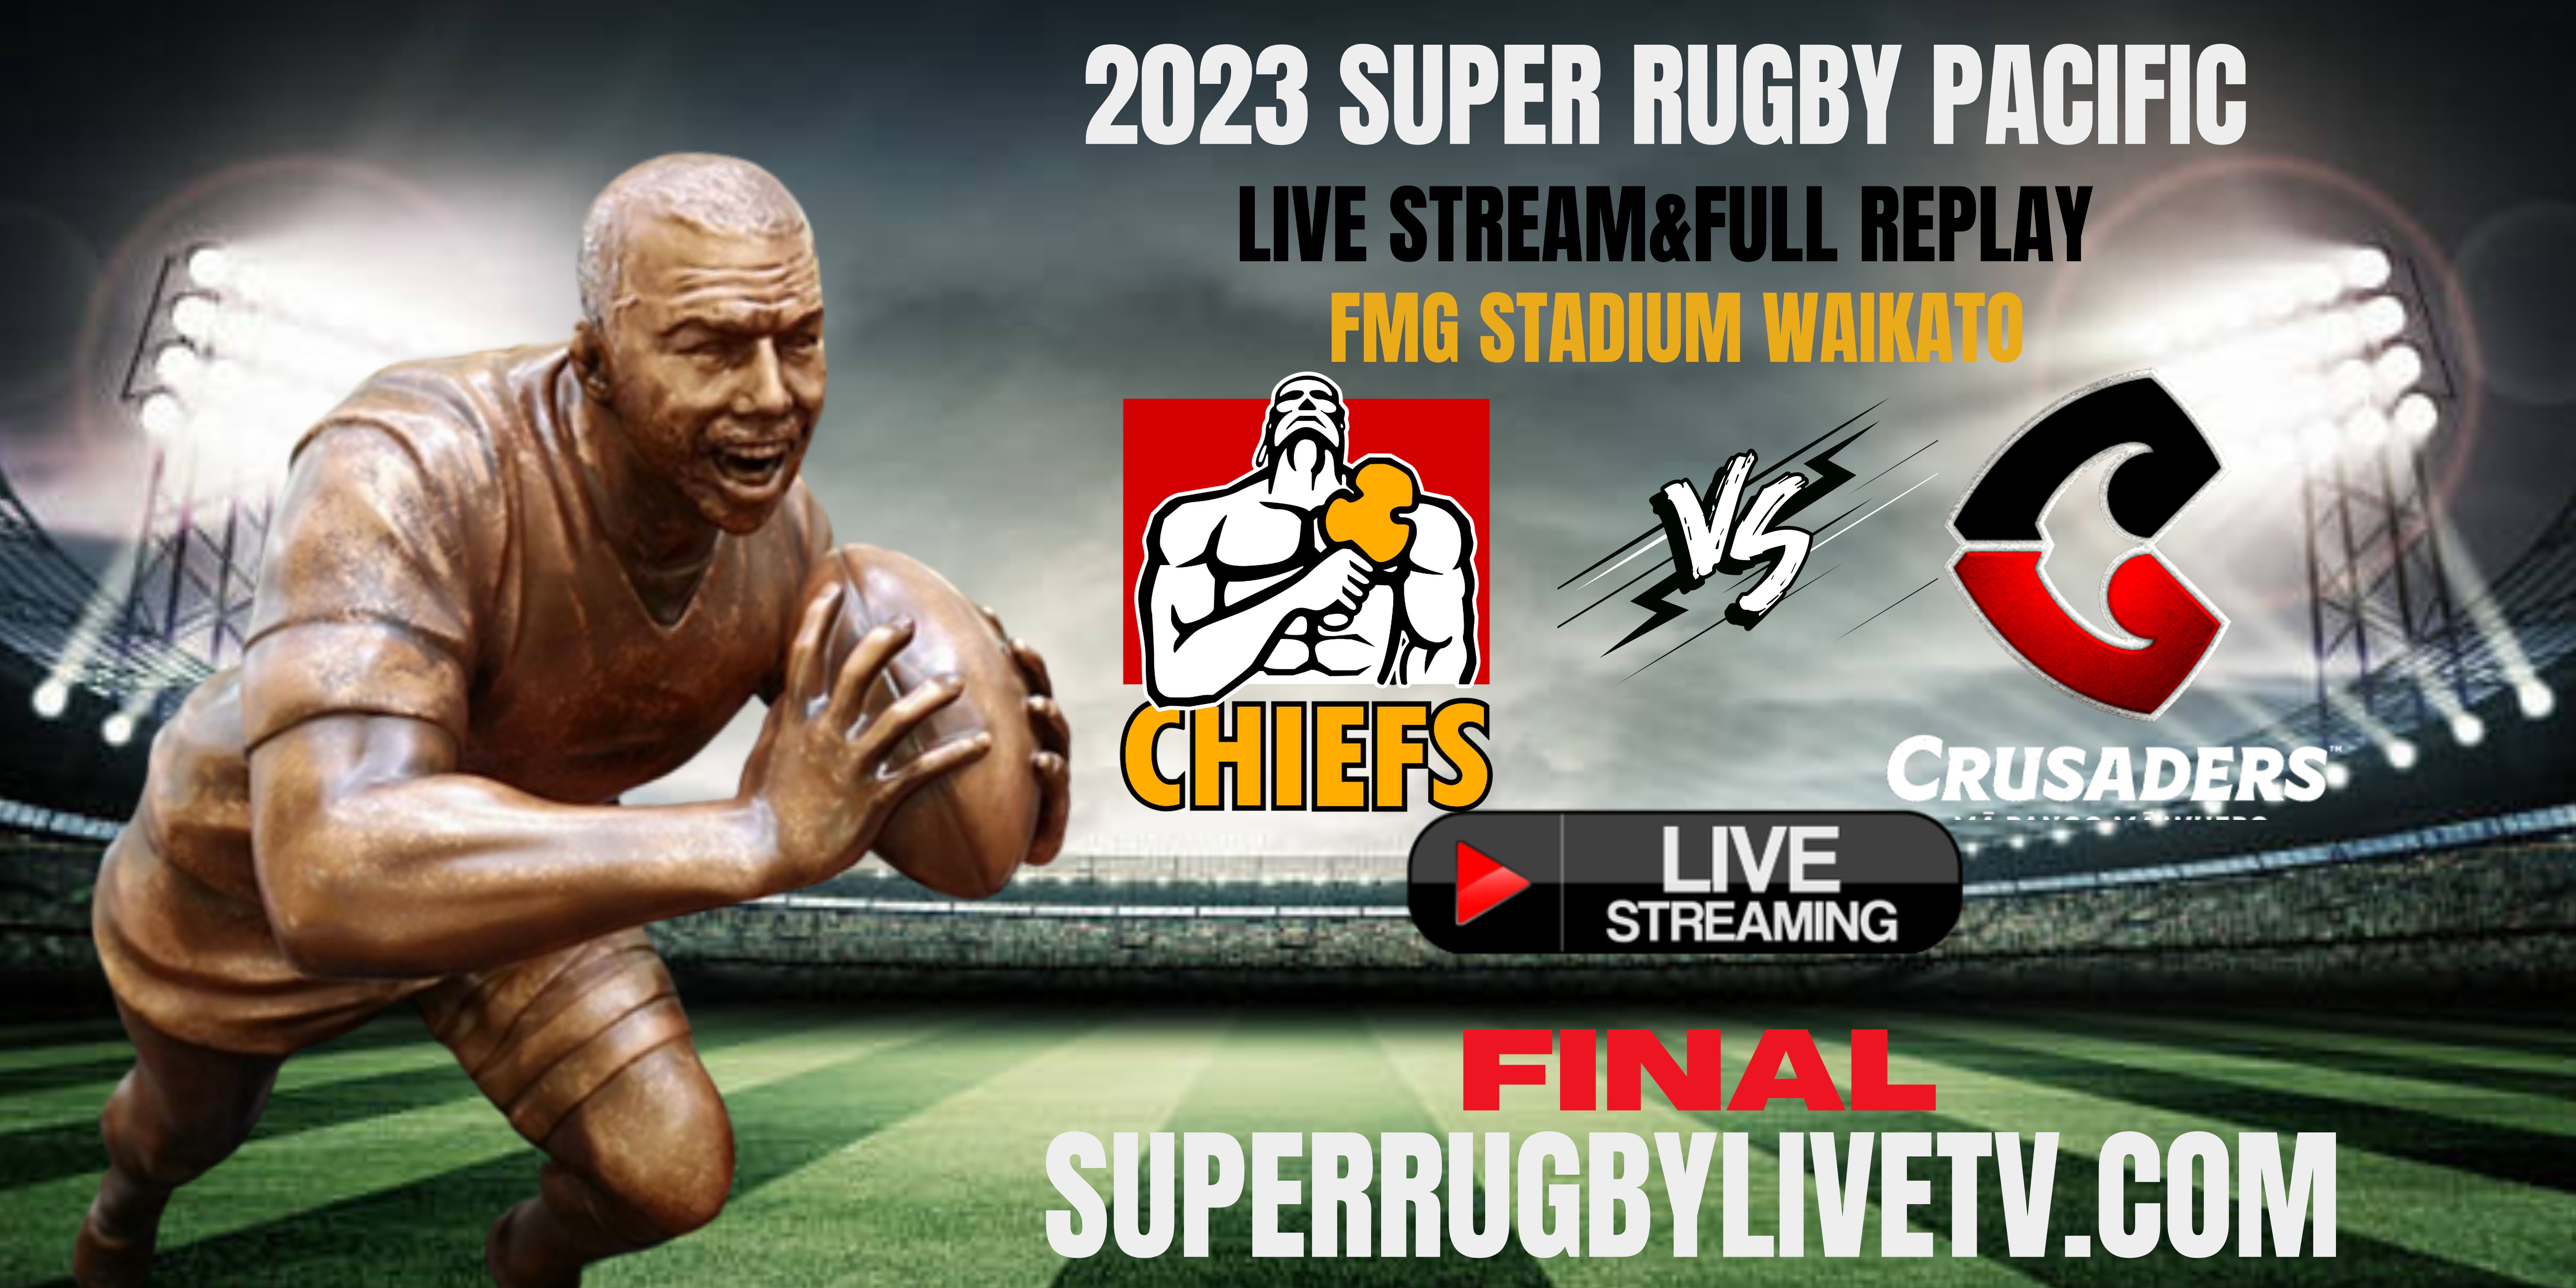 crusaders-vs-chiefs-super-rugby-grand-final-live-streaming